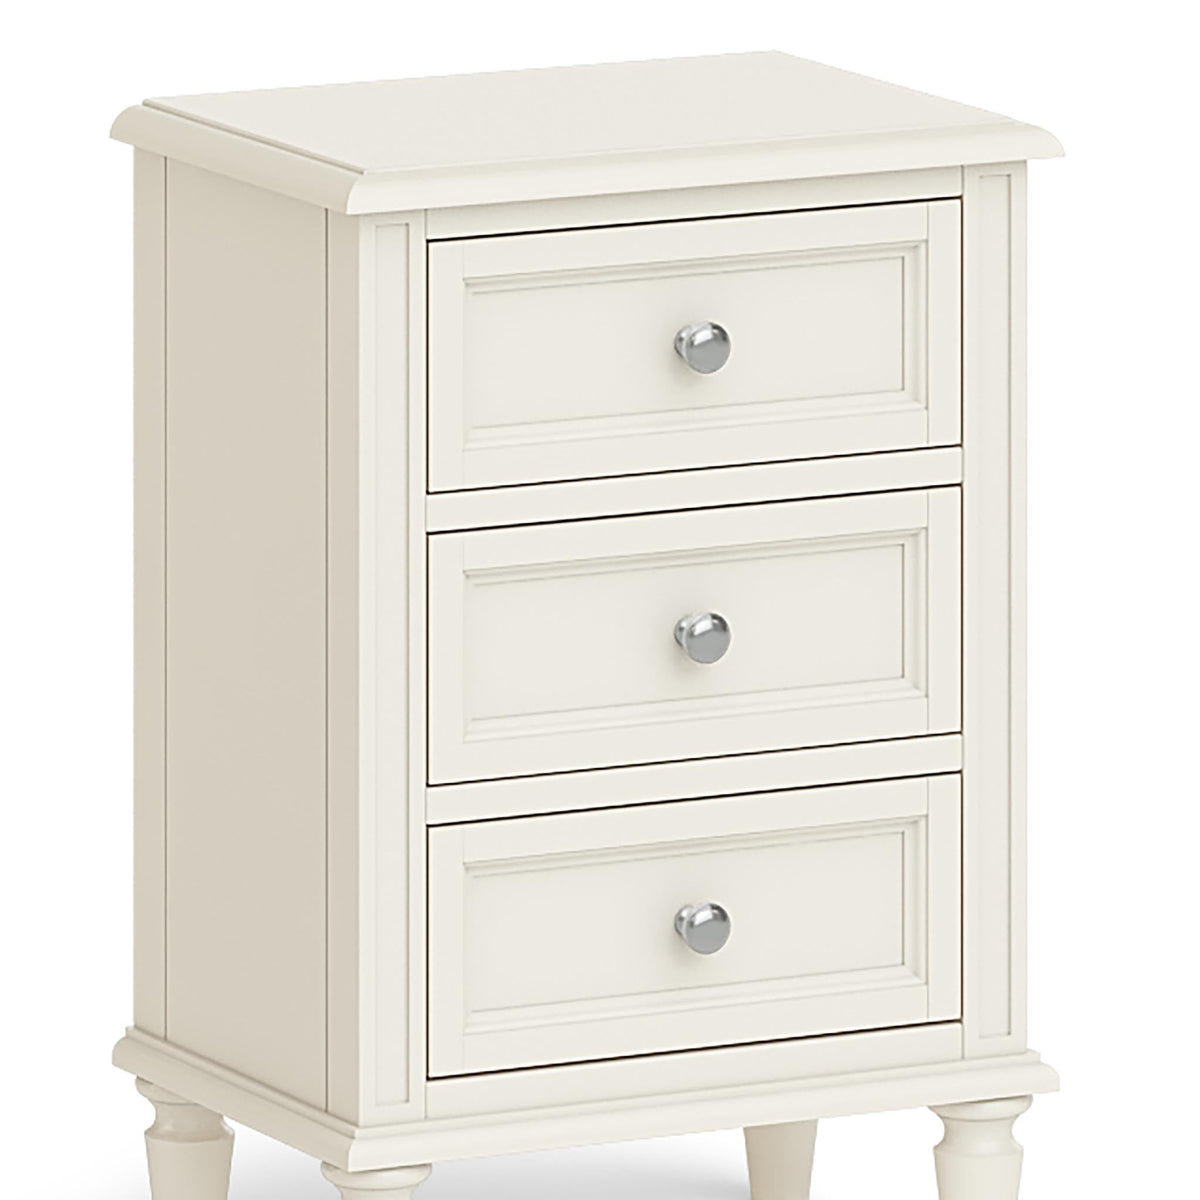 The Mulsanne Cream French Style Bedside Table with 3 Drawers - Close Up of Drawers